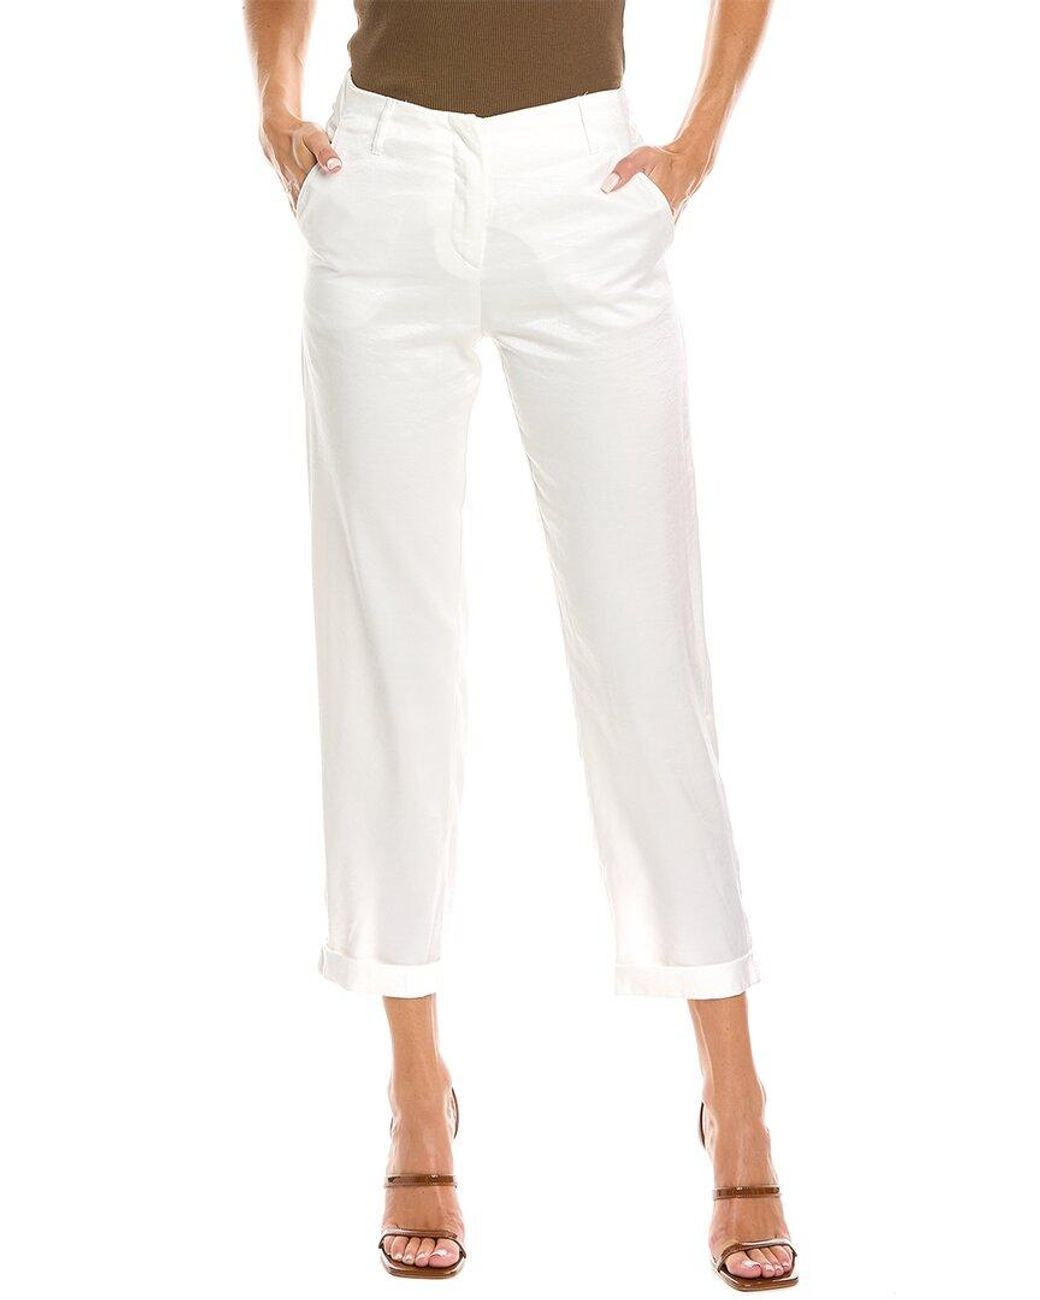 Save 2% Armani Exchange Synthetic Trouser in White Womens Clothing Trousers Slacks and Chinos Straight-leg trousers 